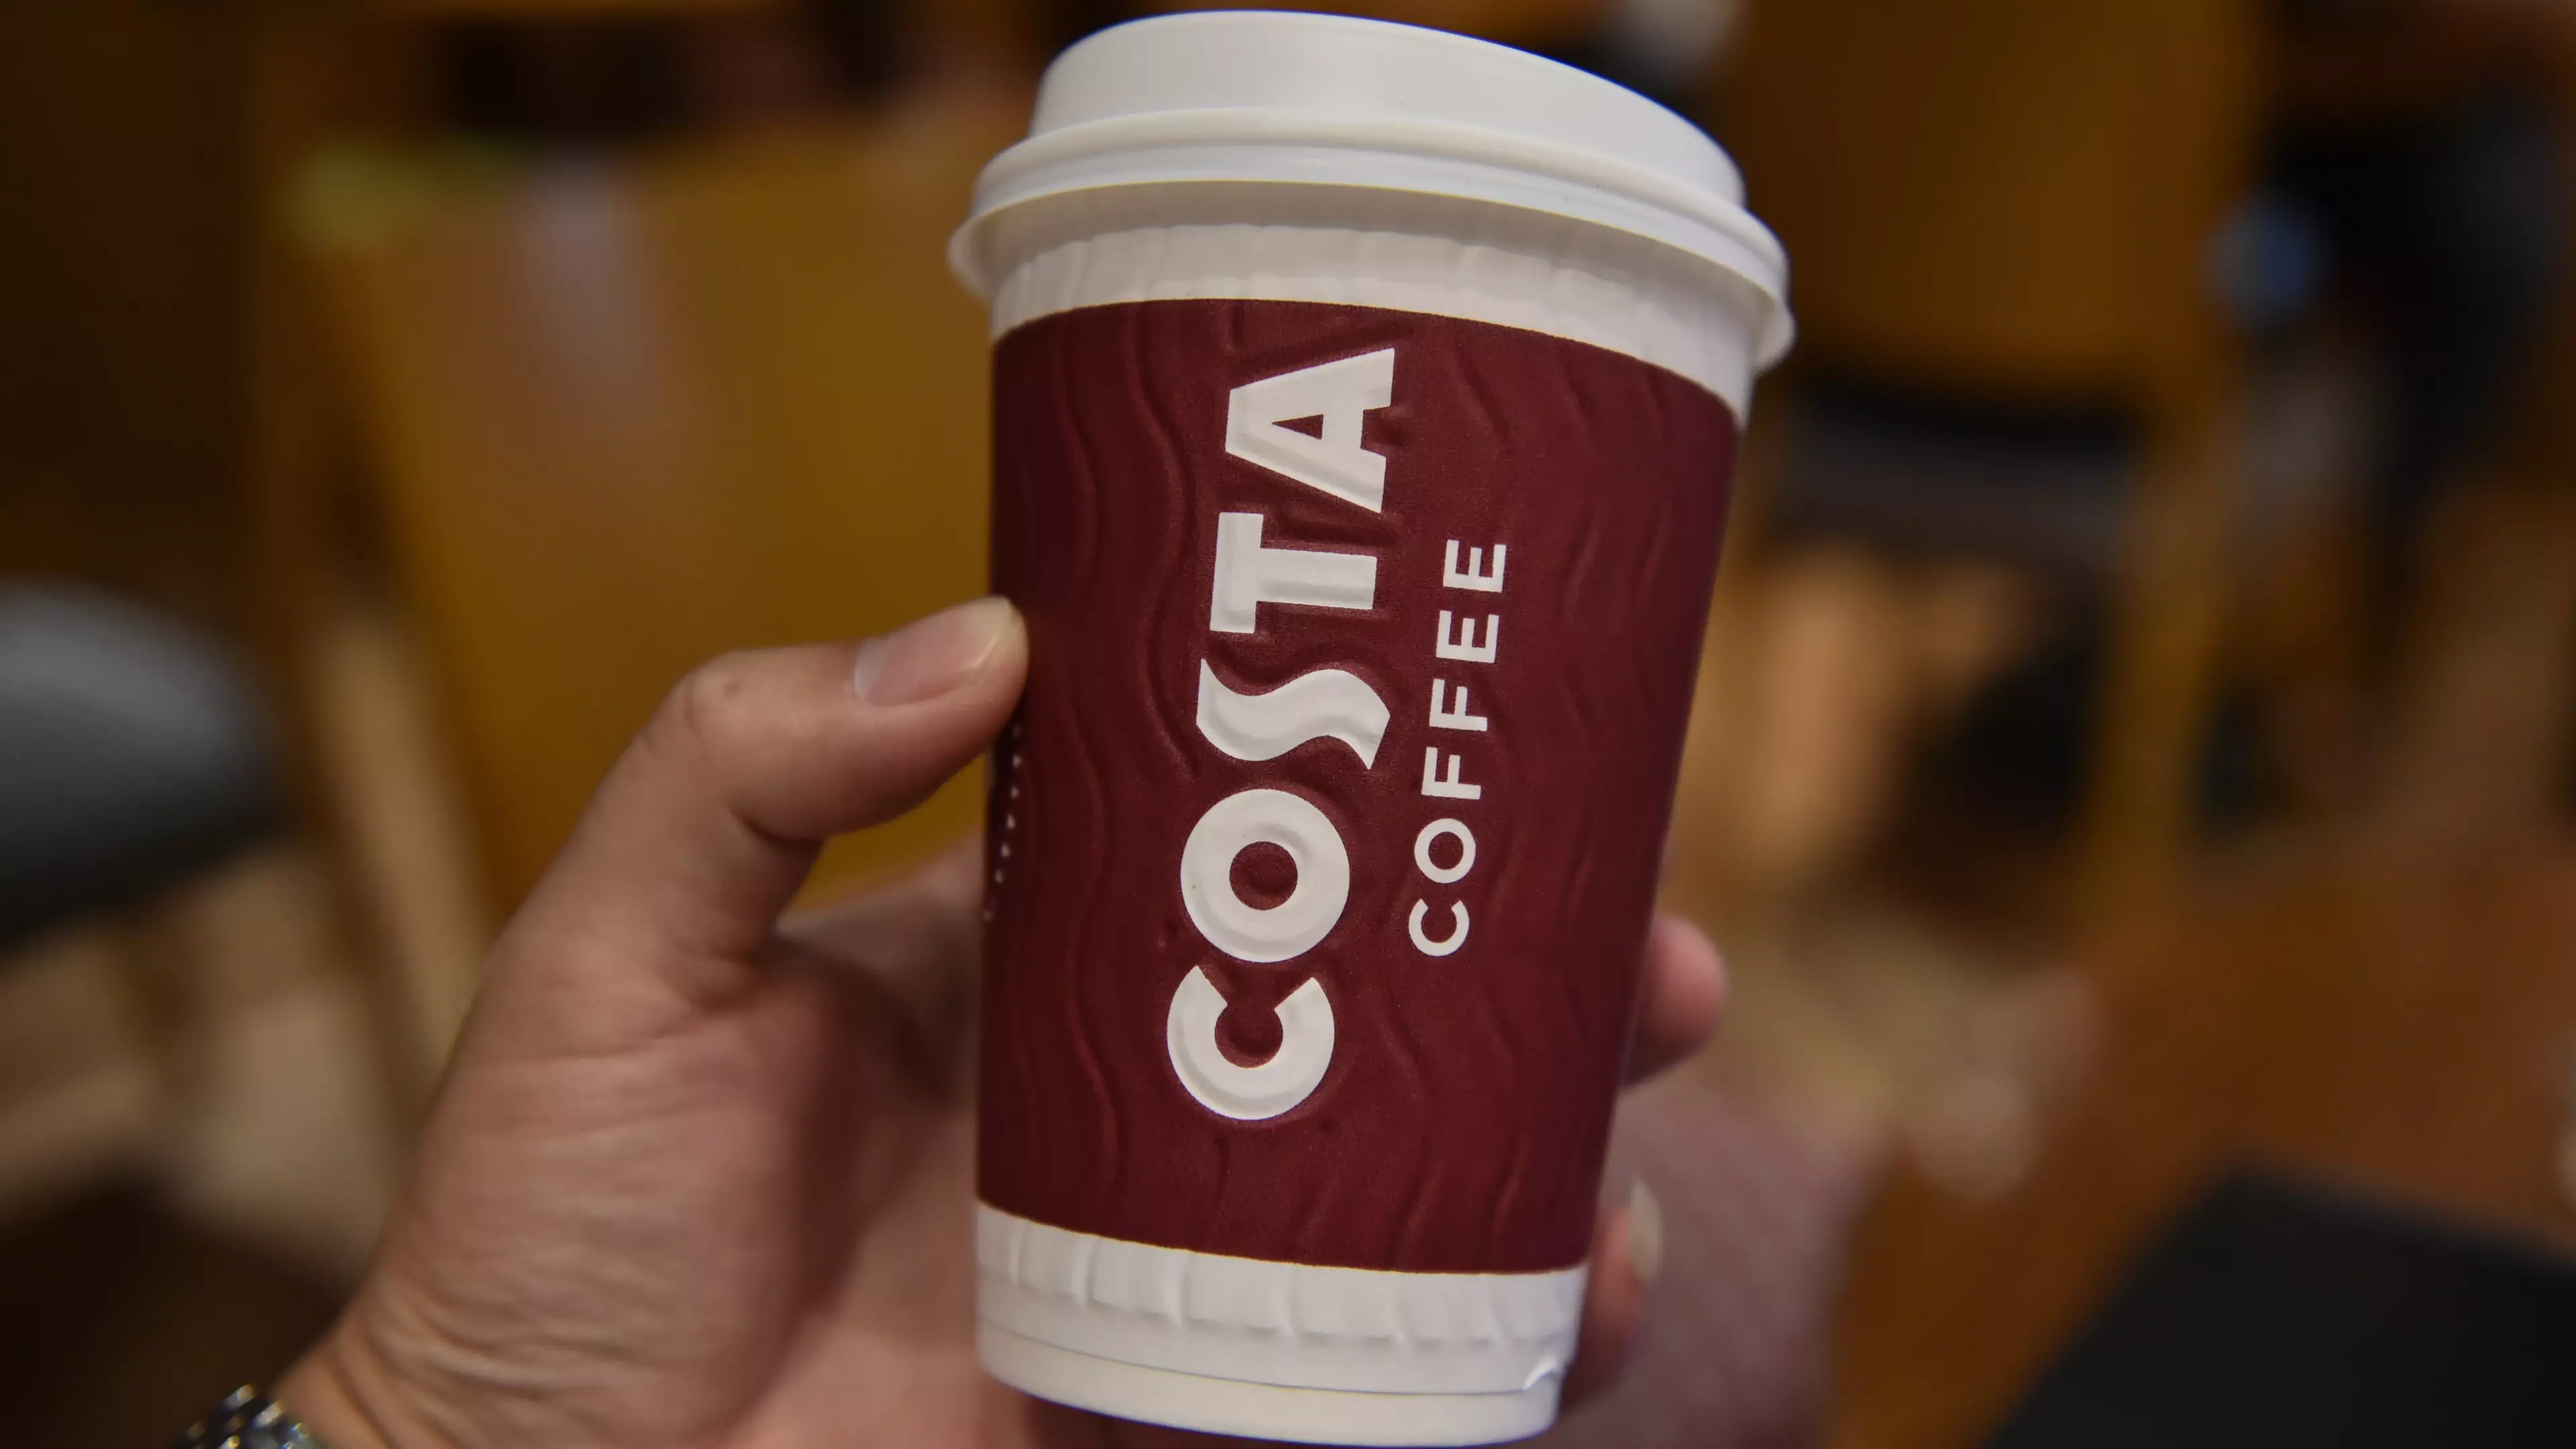 Costa Coffee Offering 50p Drinks To Celebrate 50th Anniversary